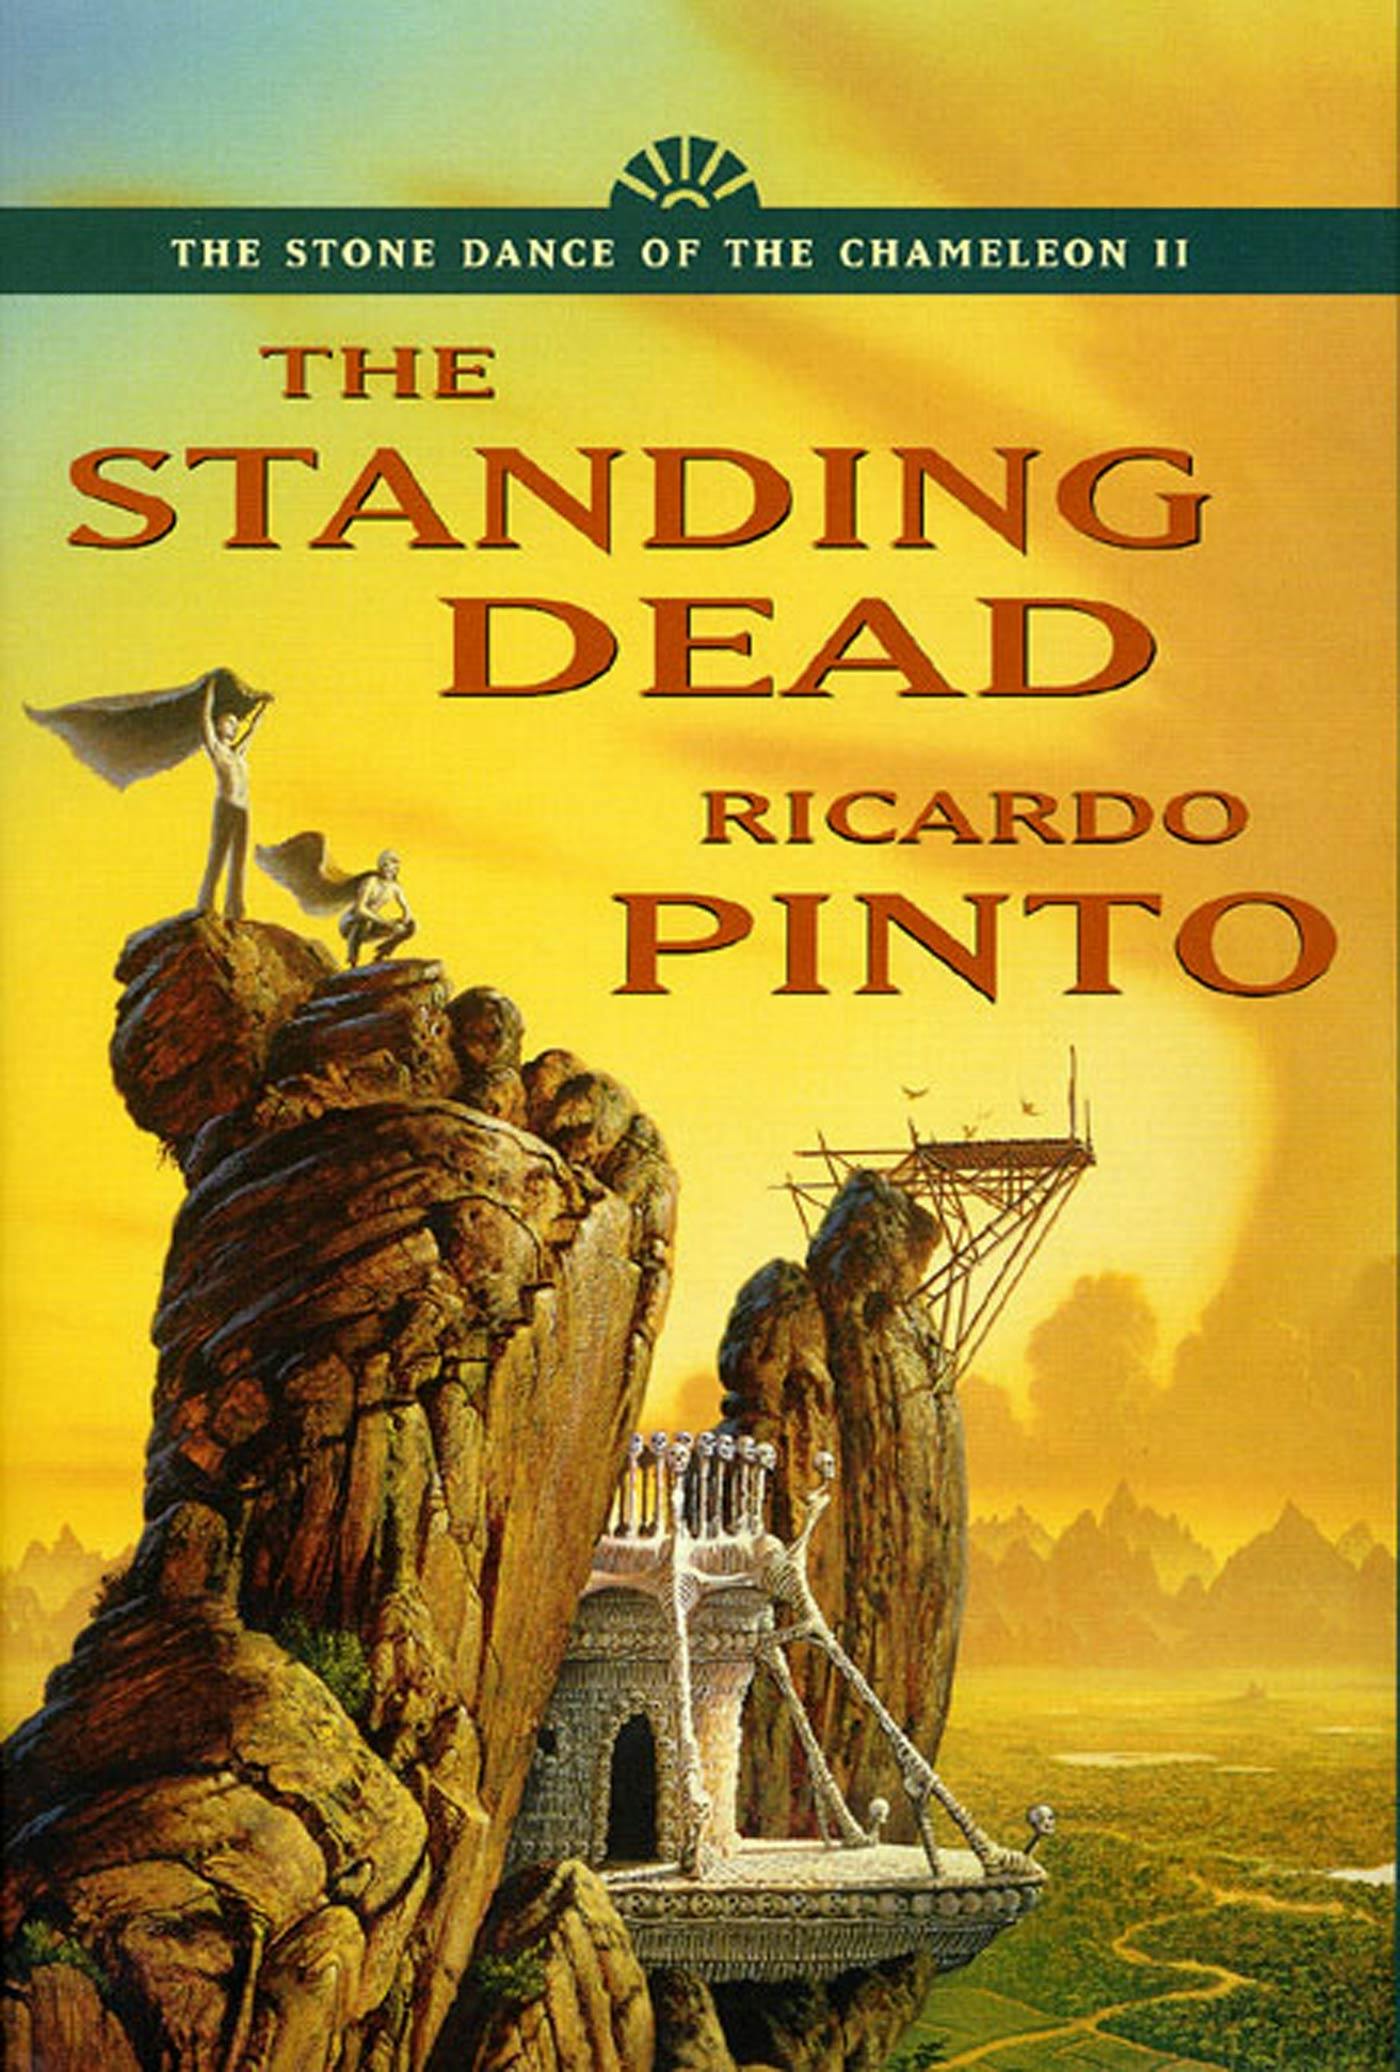 Cover for the book titled as: The Standing Dead